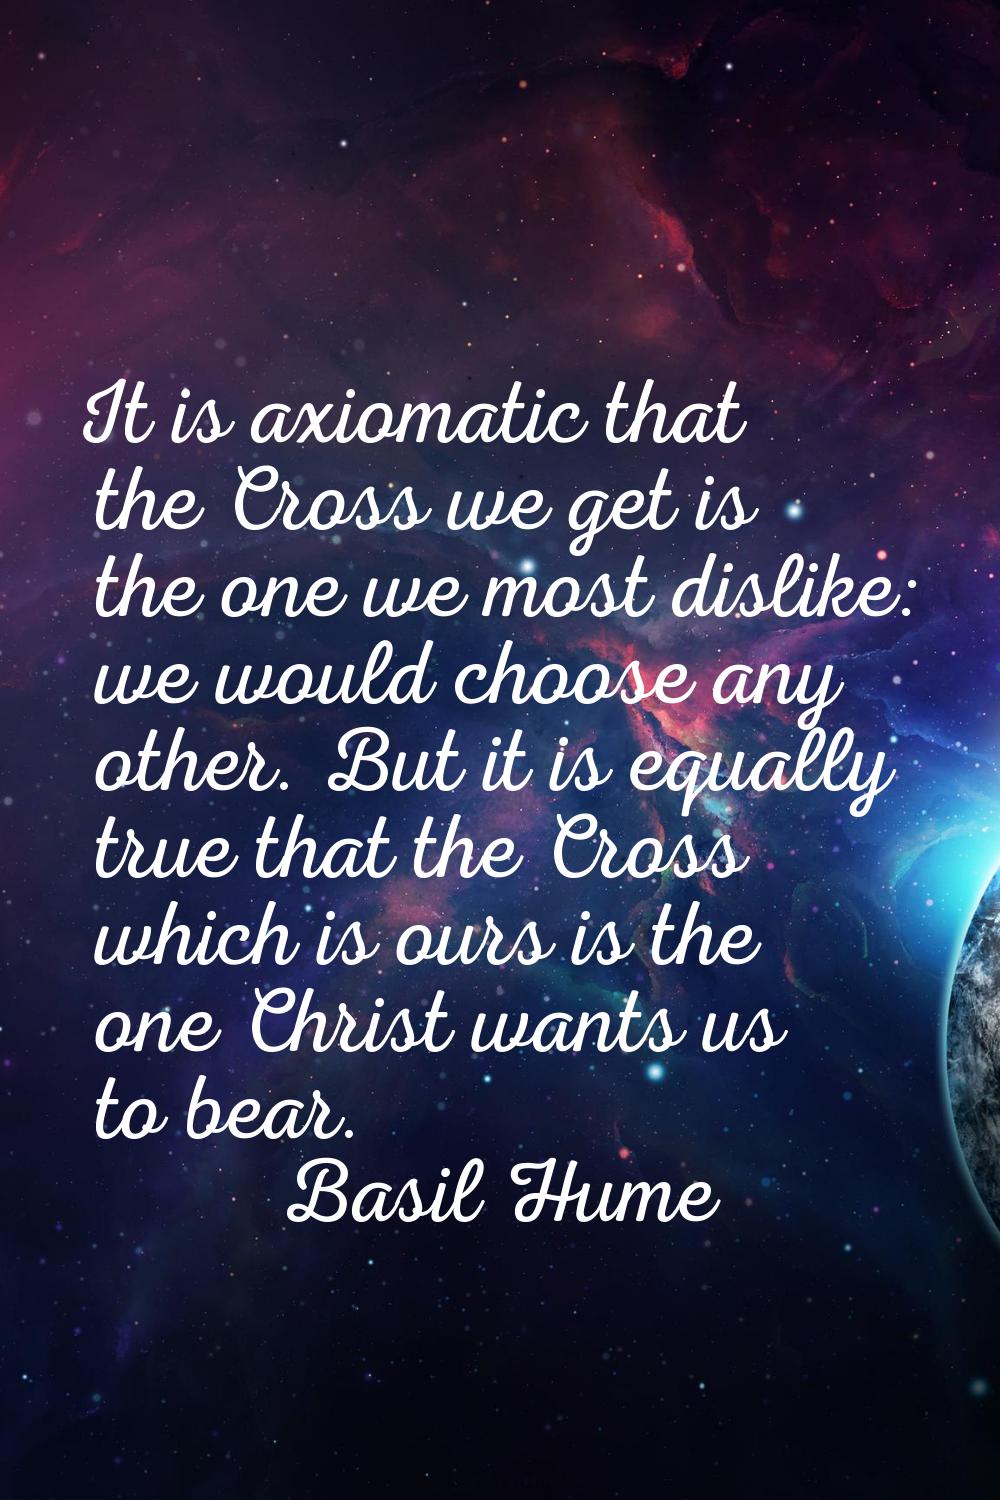 It is axiomatic that the Cross we get is the one we most dislike: we would choose any other. But it